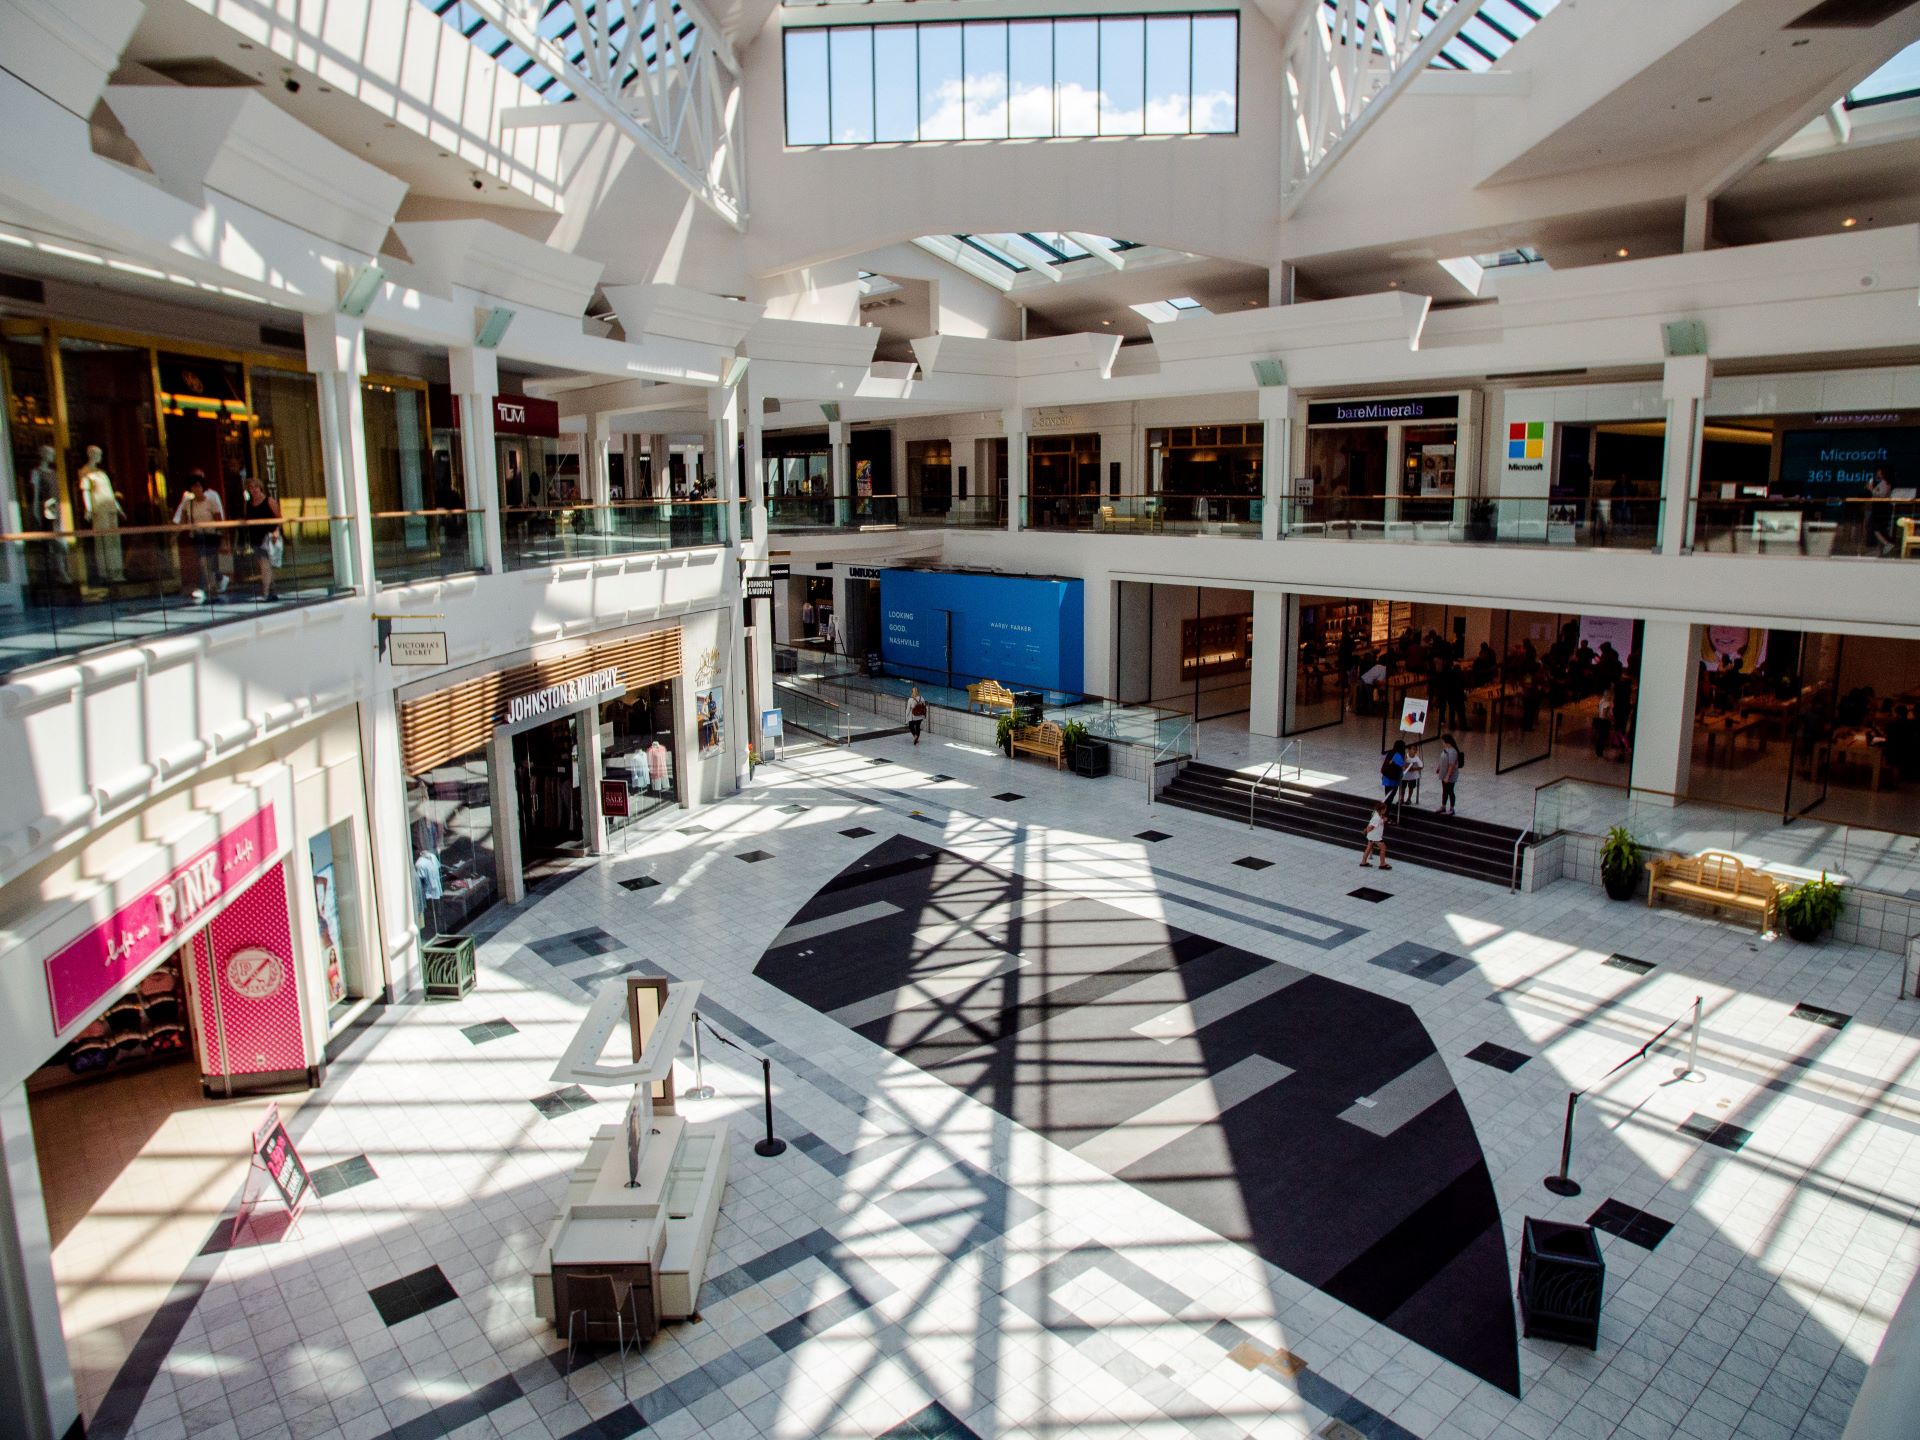 The Mall at Green Hills